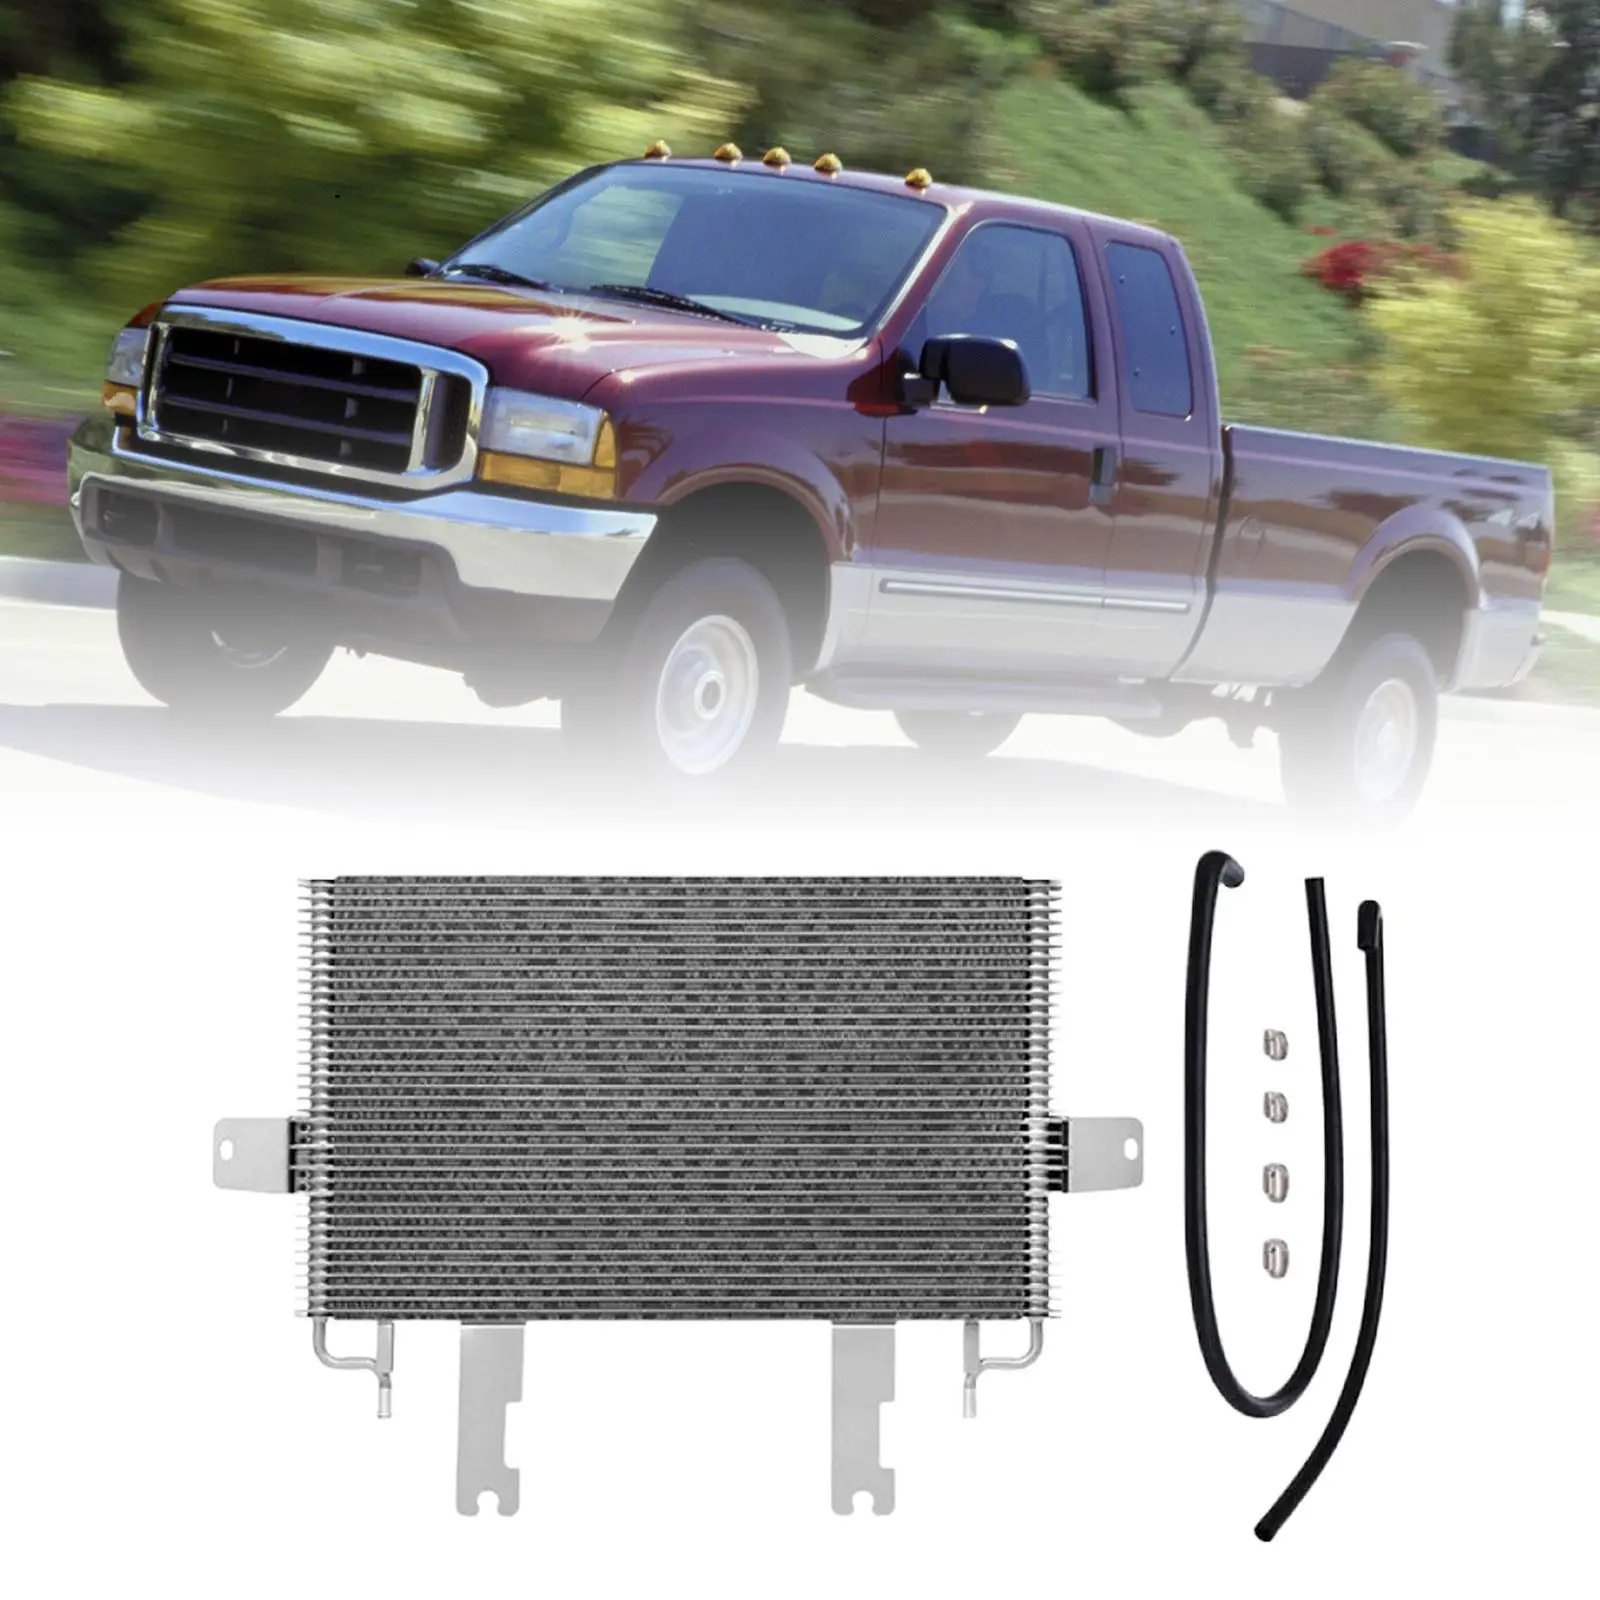 Auto Transmission Cooler Car Accessories for 7.3L Powerstroke High Reliability Quality